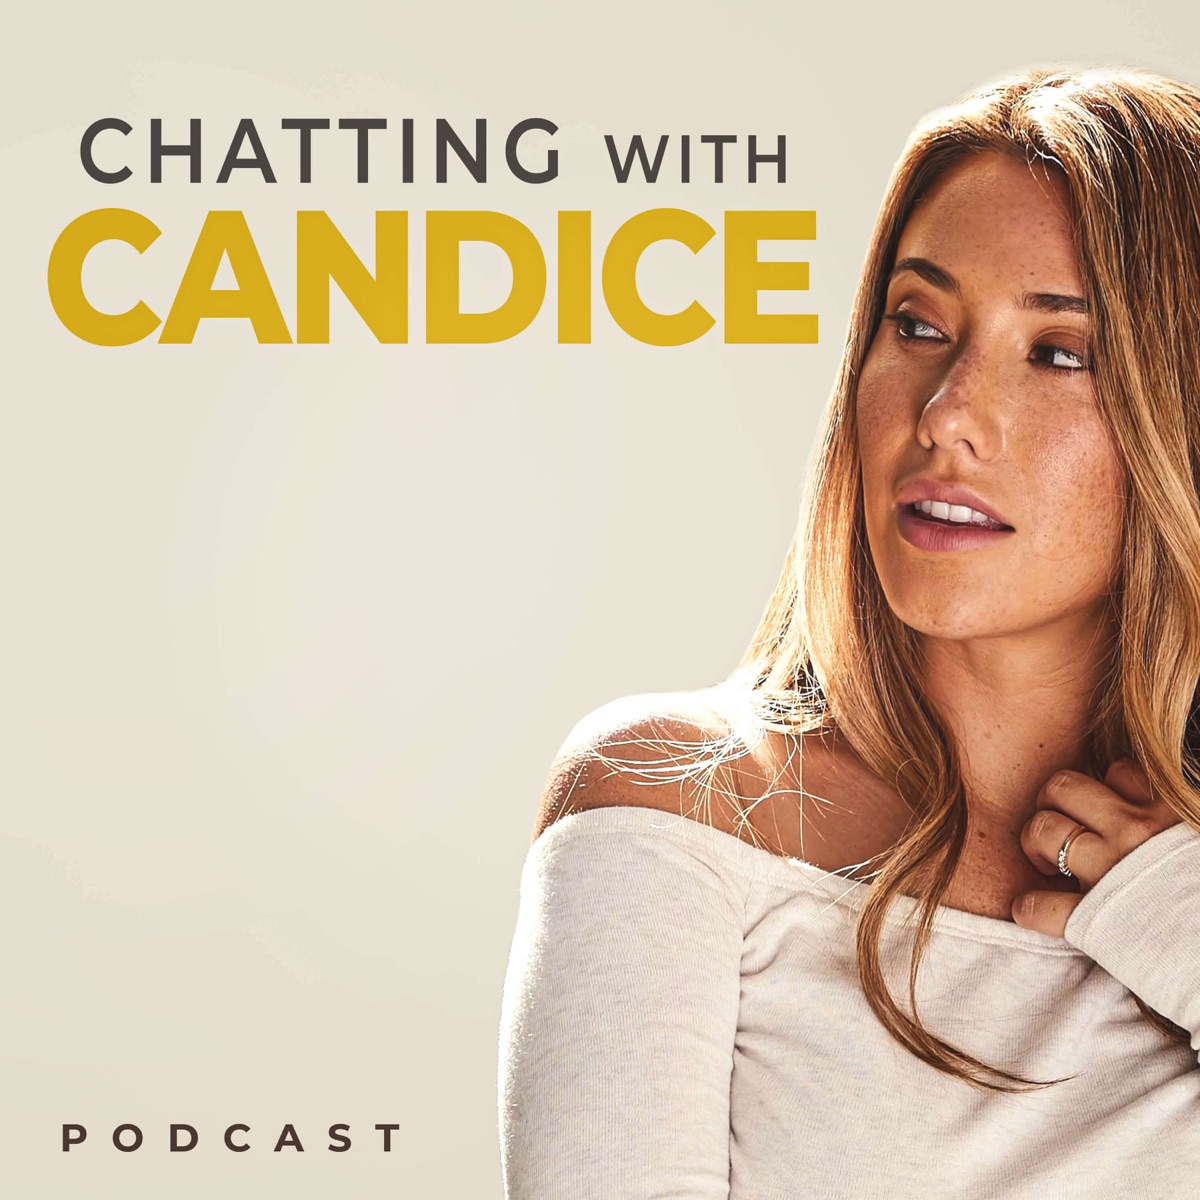 Chatting with Candice – Podcast bilde